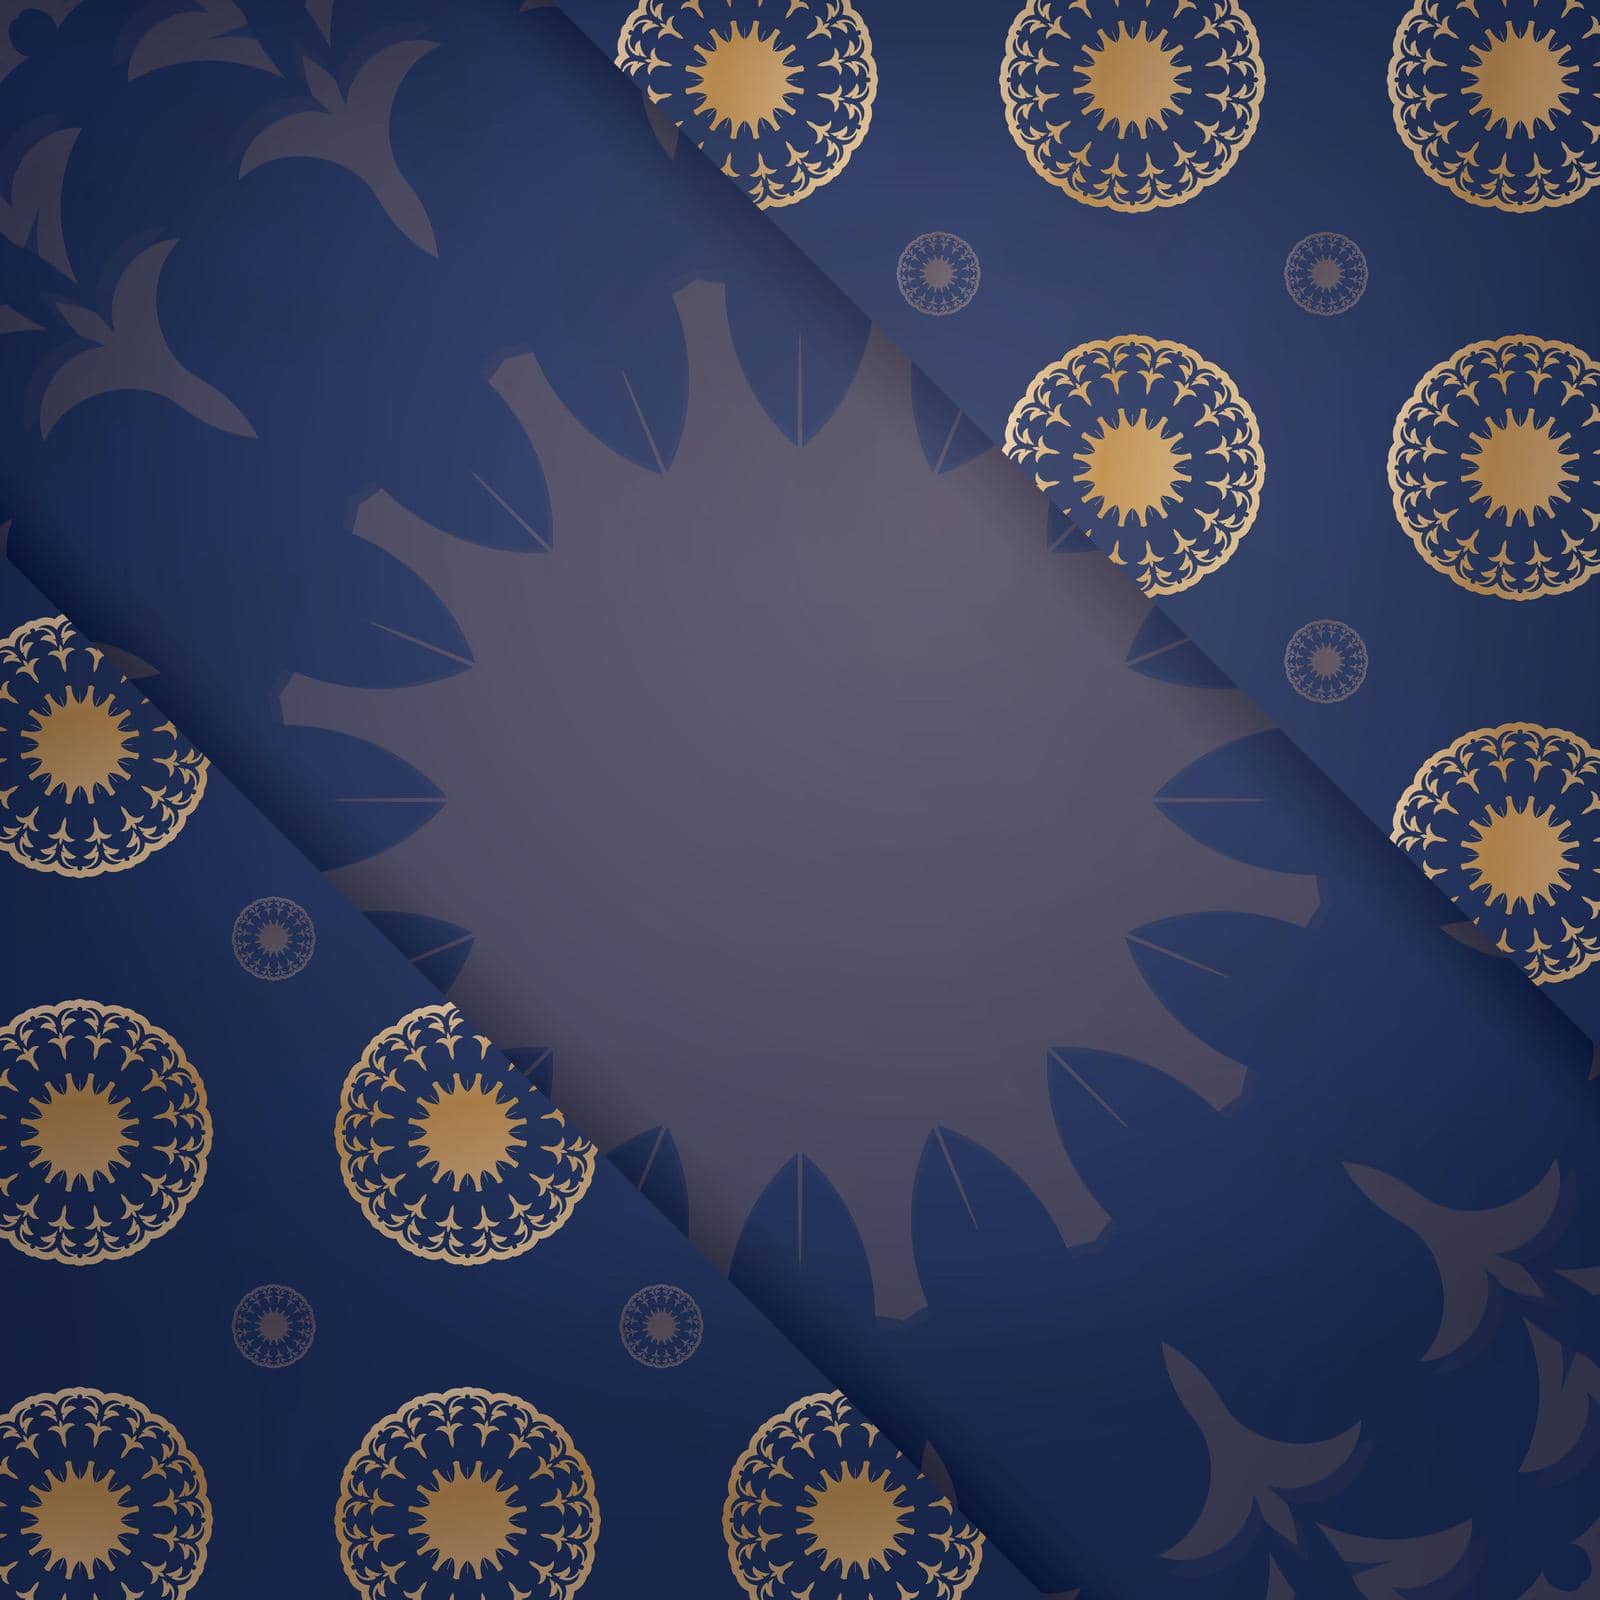 Business card template in dark blue with gold mandala pattern for your brand.